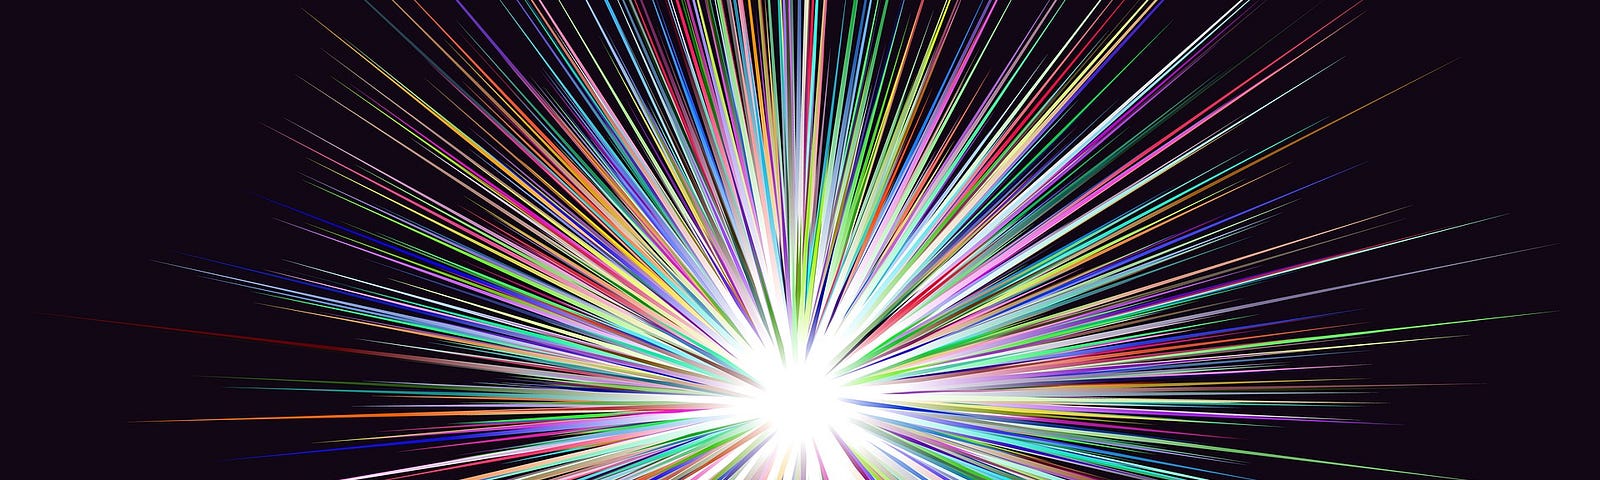 A black background with a rainbow burst of light radiating out from the centre like a star.